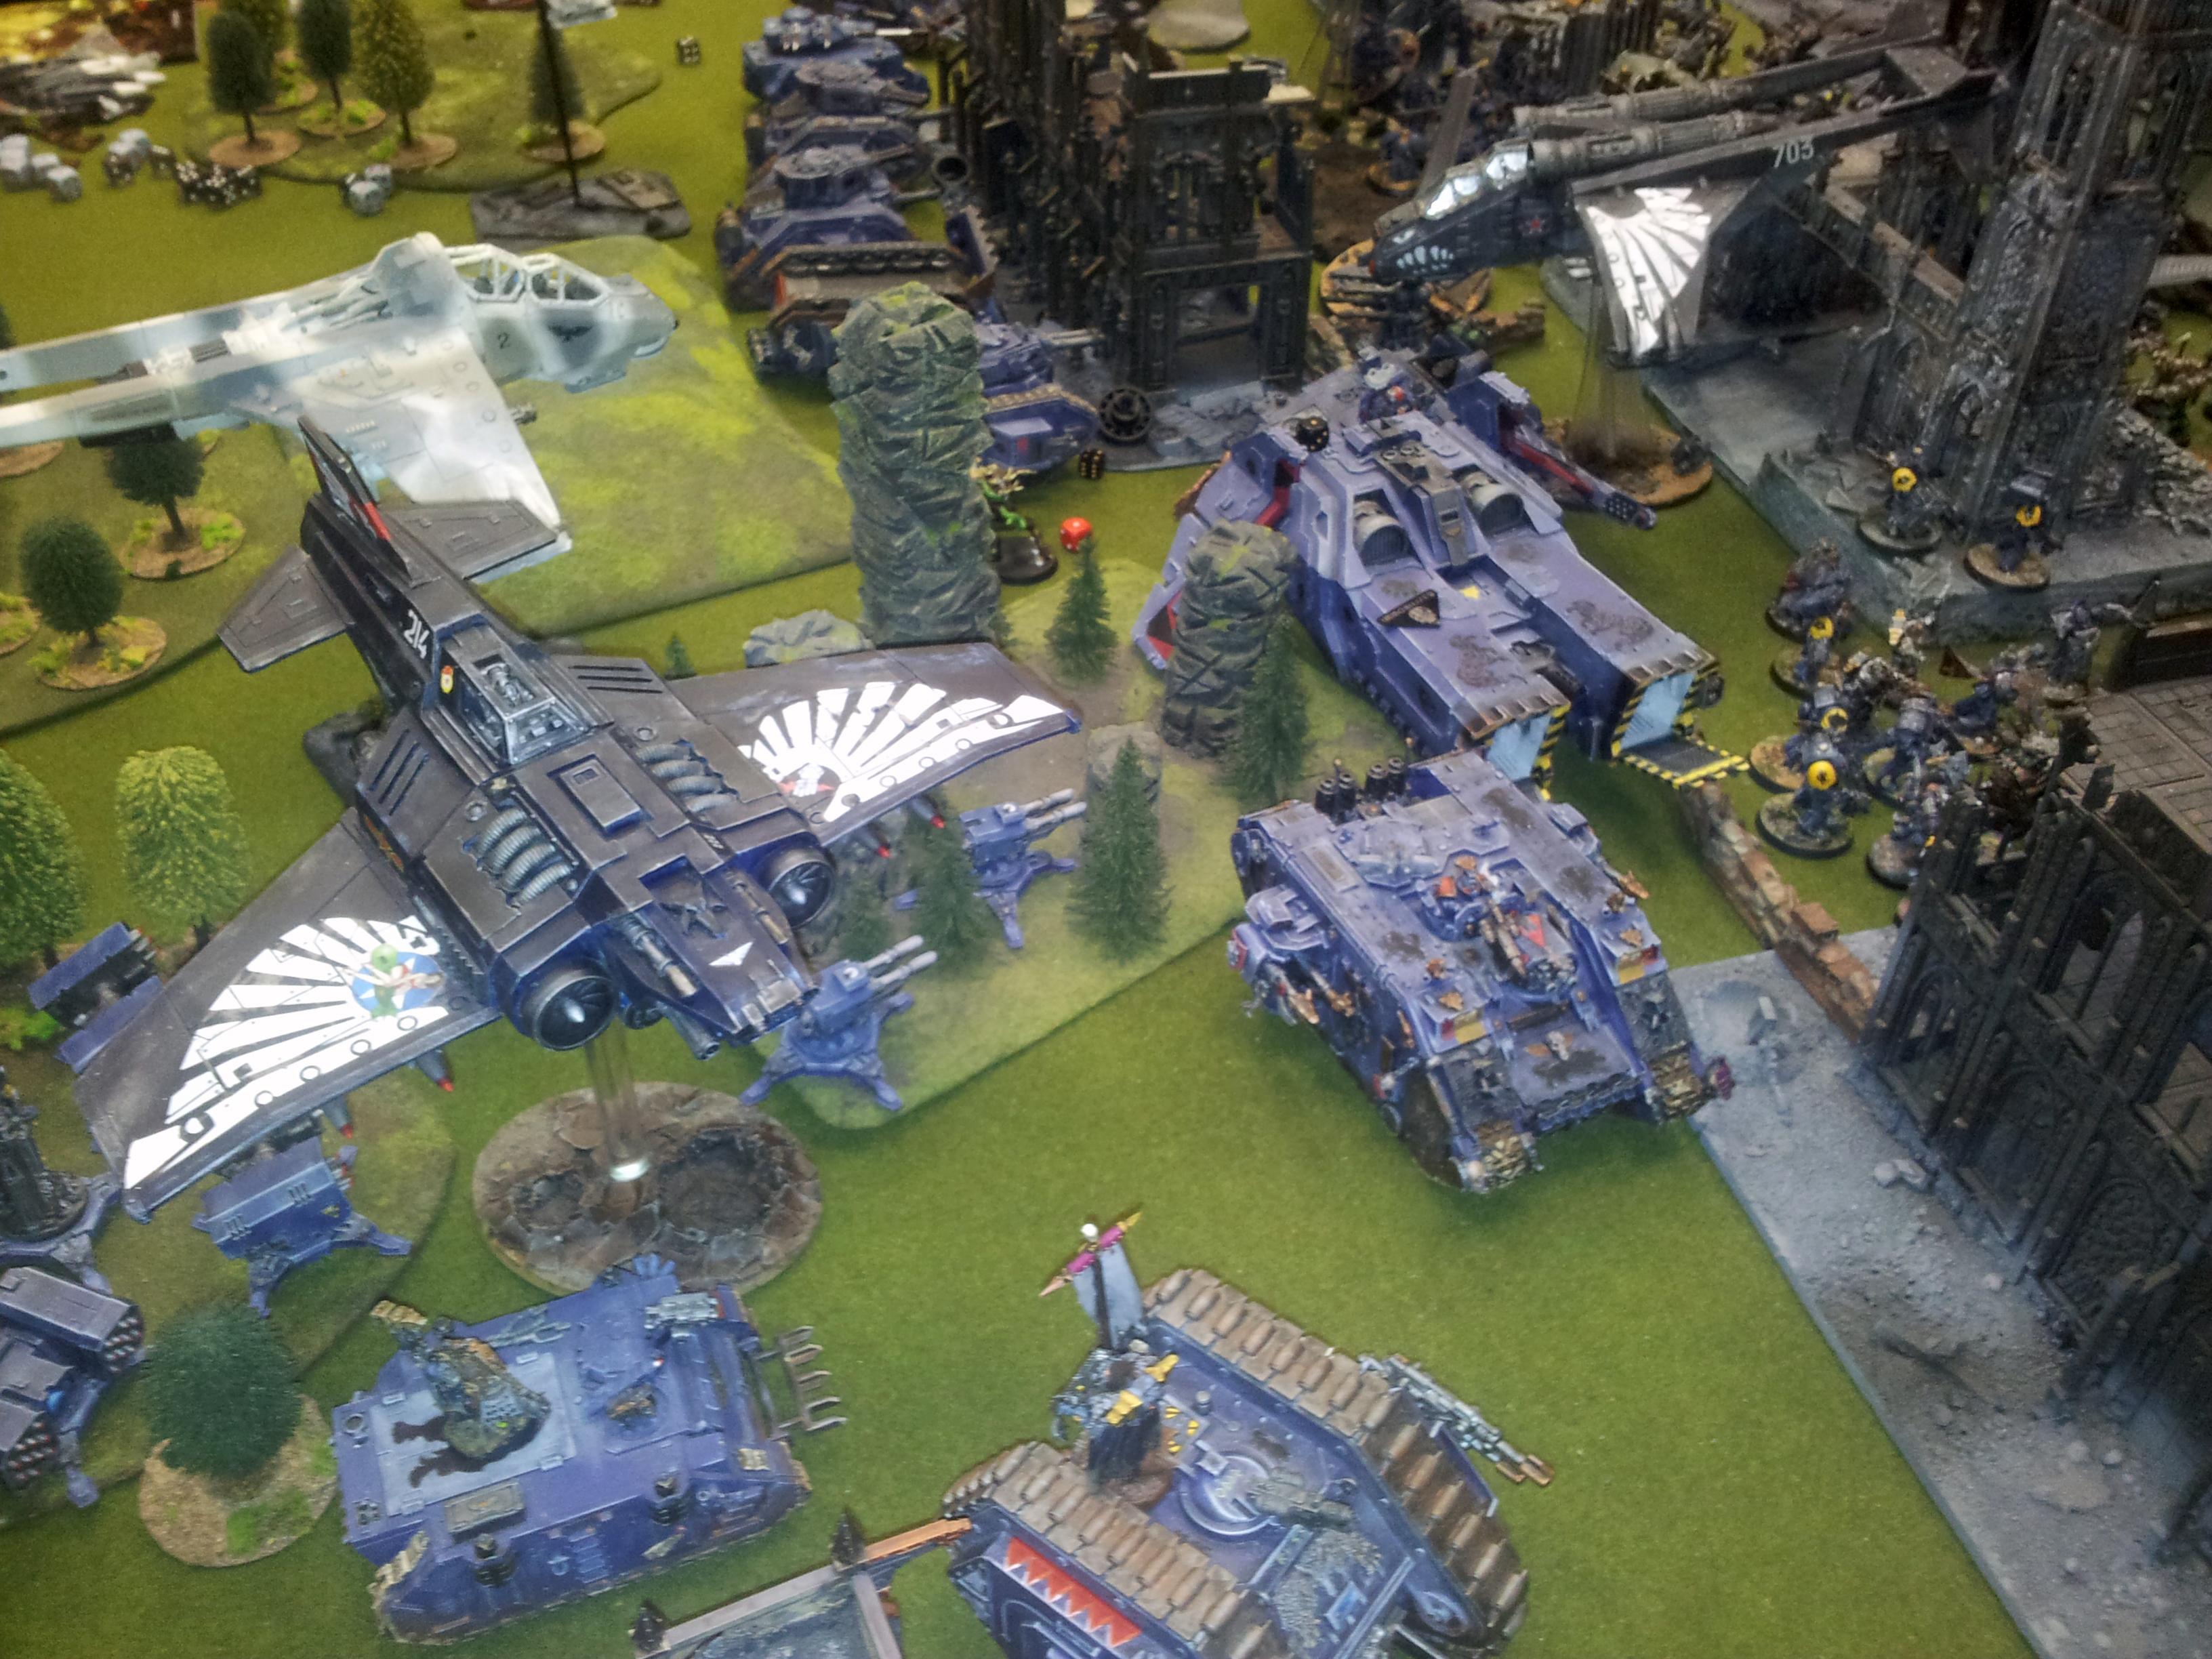 Apocalypse, Moscow, Russians, Space Wolves, Warhammer 40,000